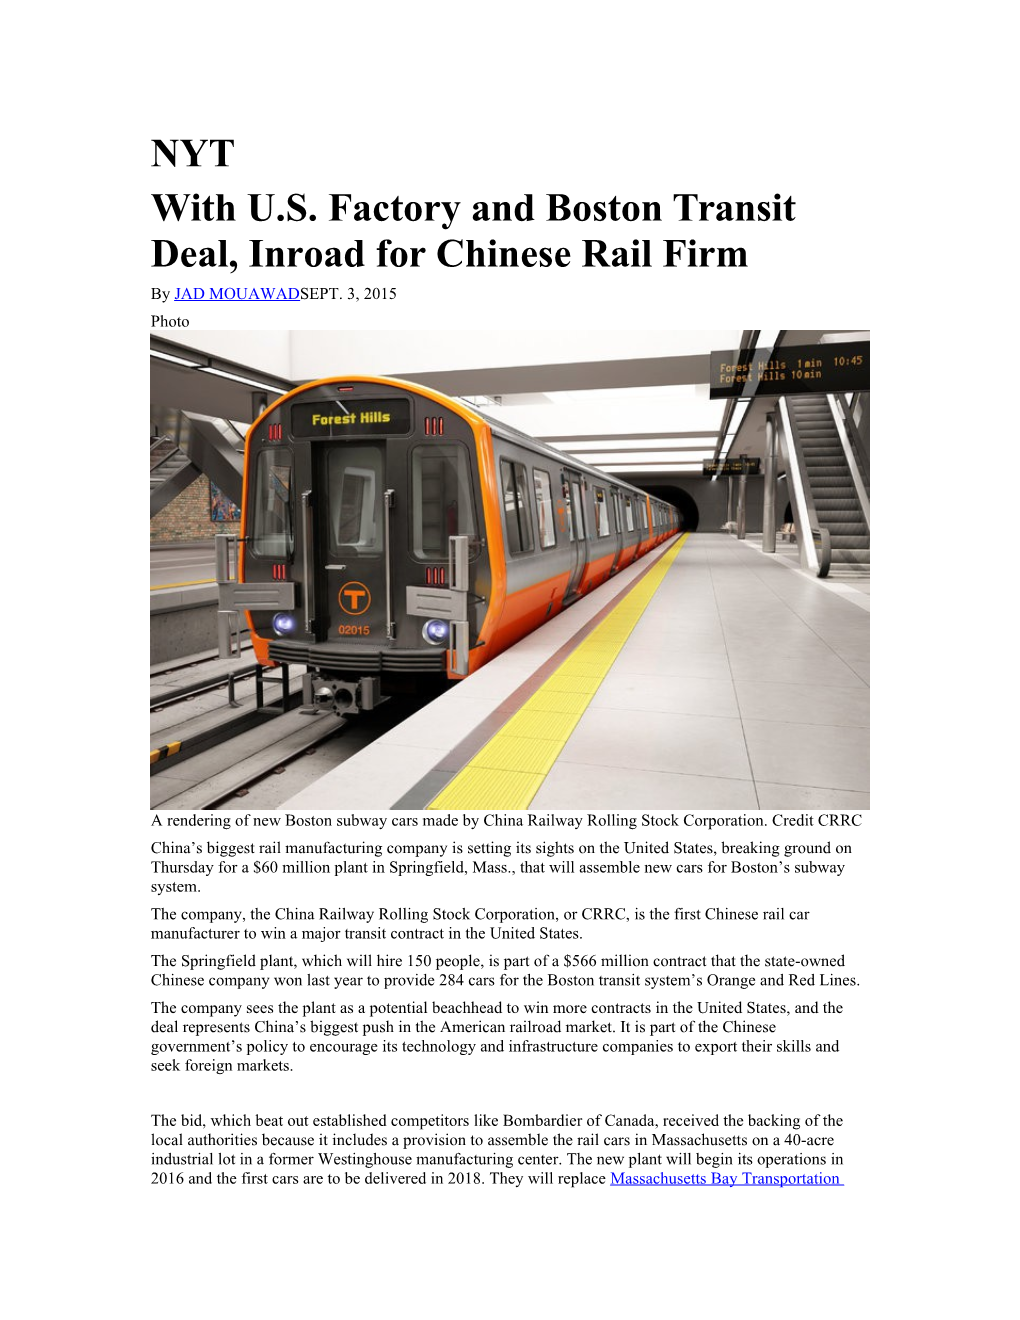 With U.S. Factory and Boston Transit Deal, Inroad for Chinese Rail Firm